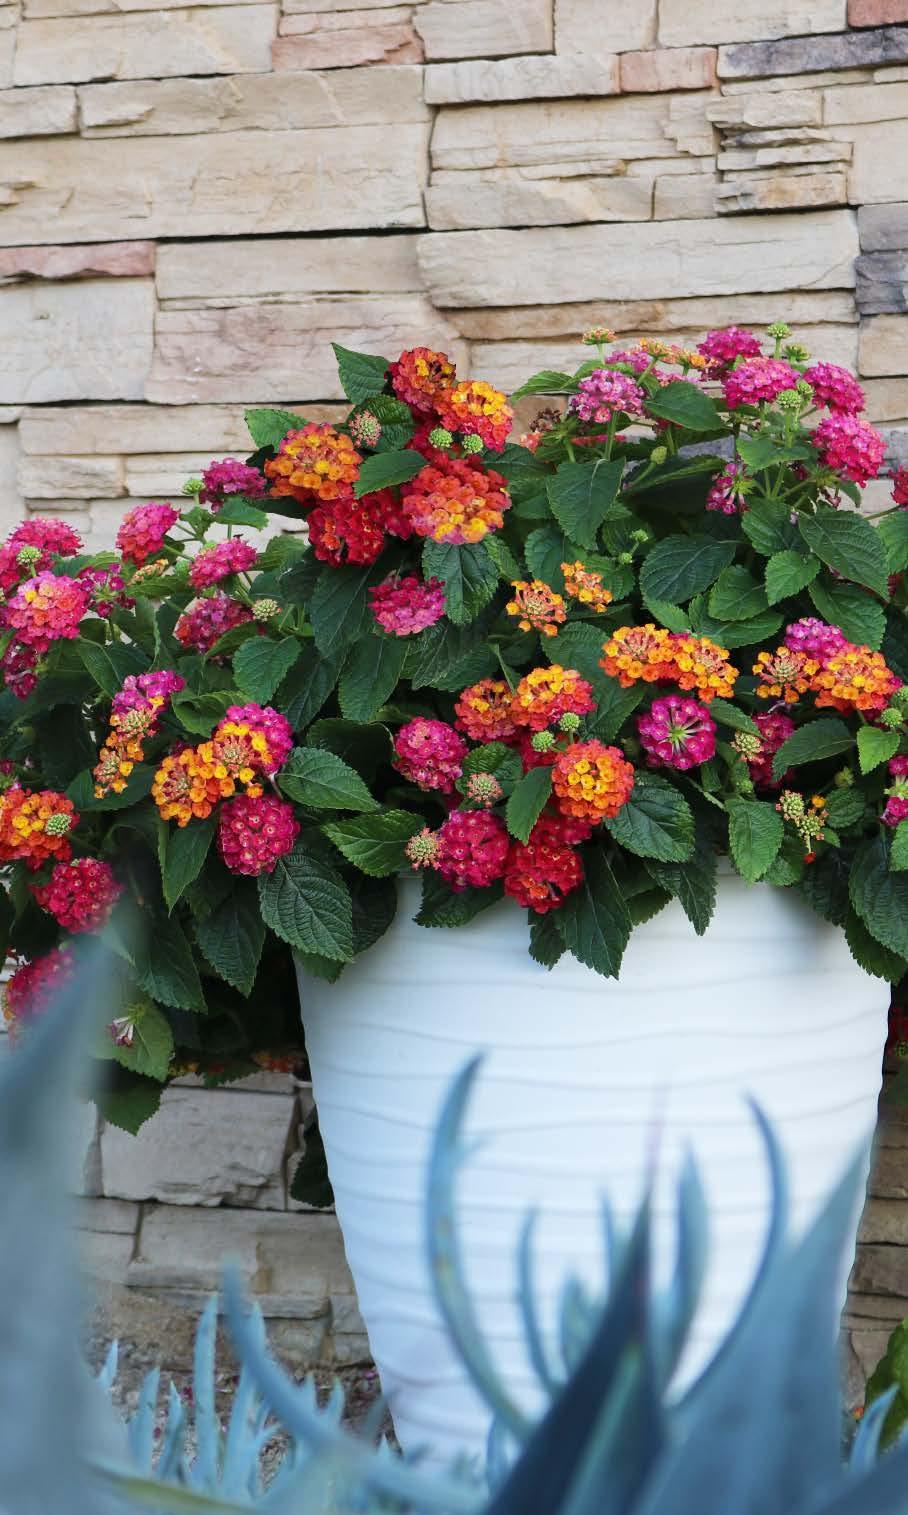 Lantana Heat-loving lantana series with low seed set Havana Pink Sky 72196 Reduced flower cycling Well-branched with